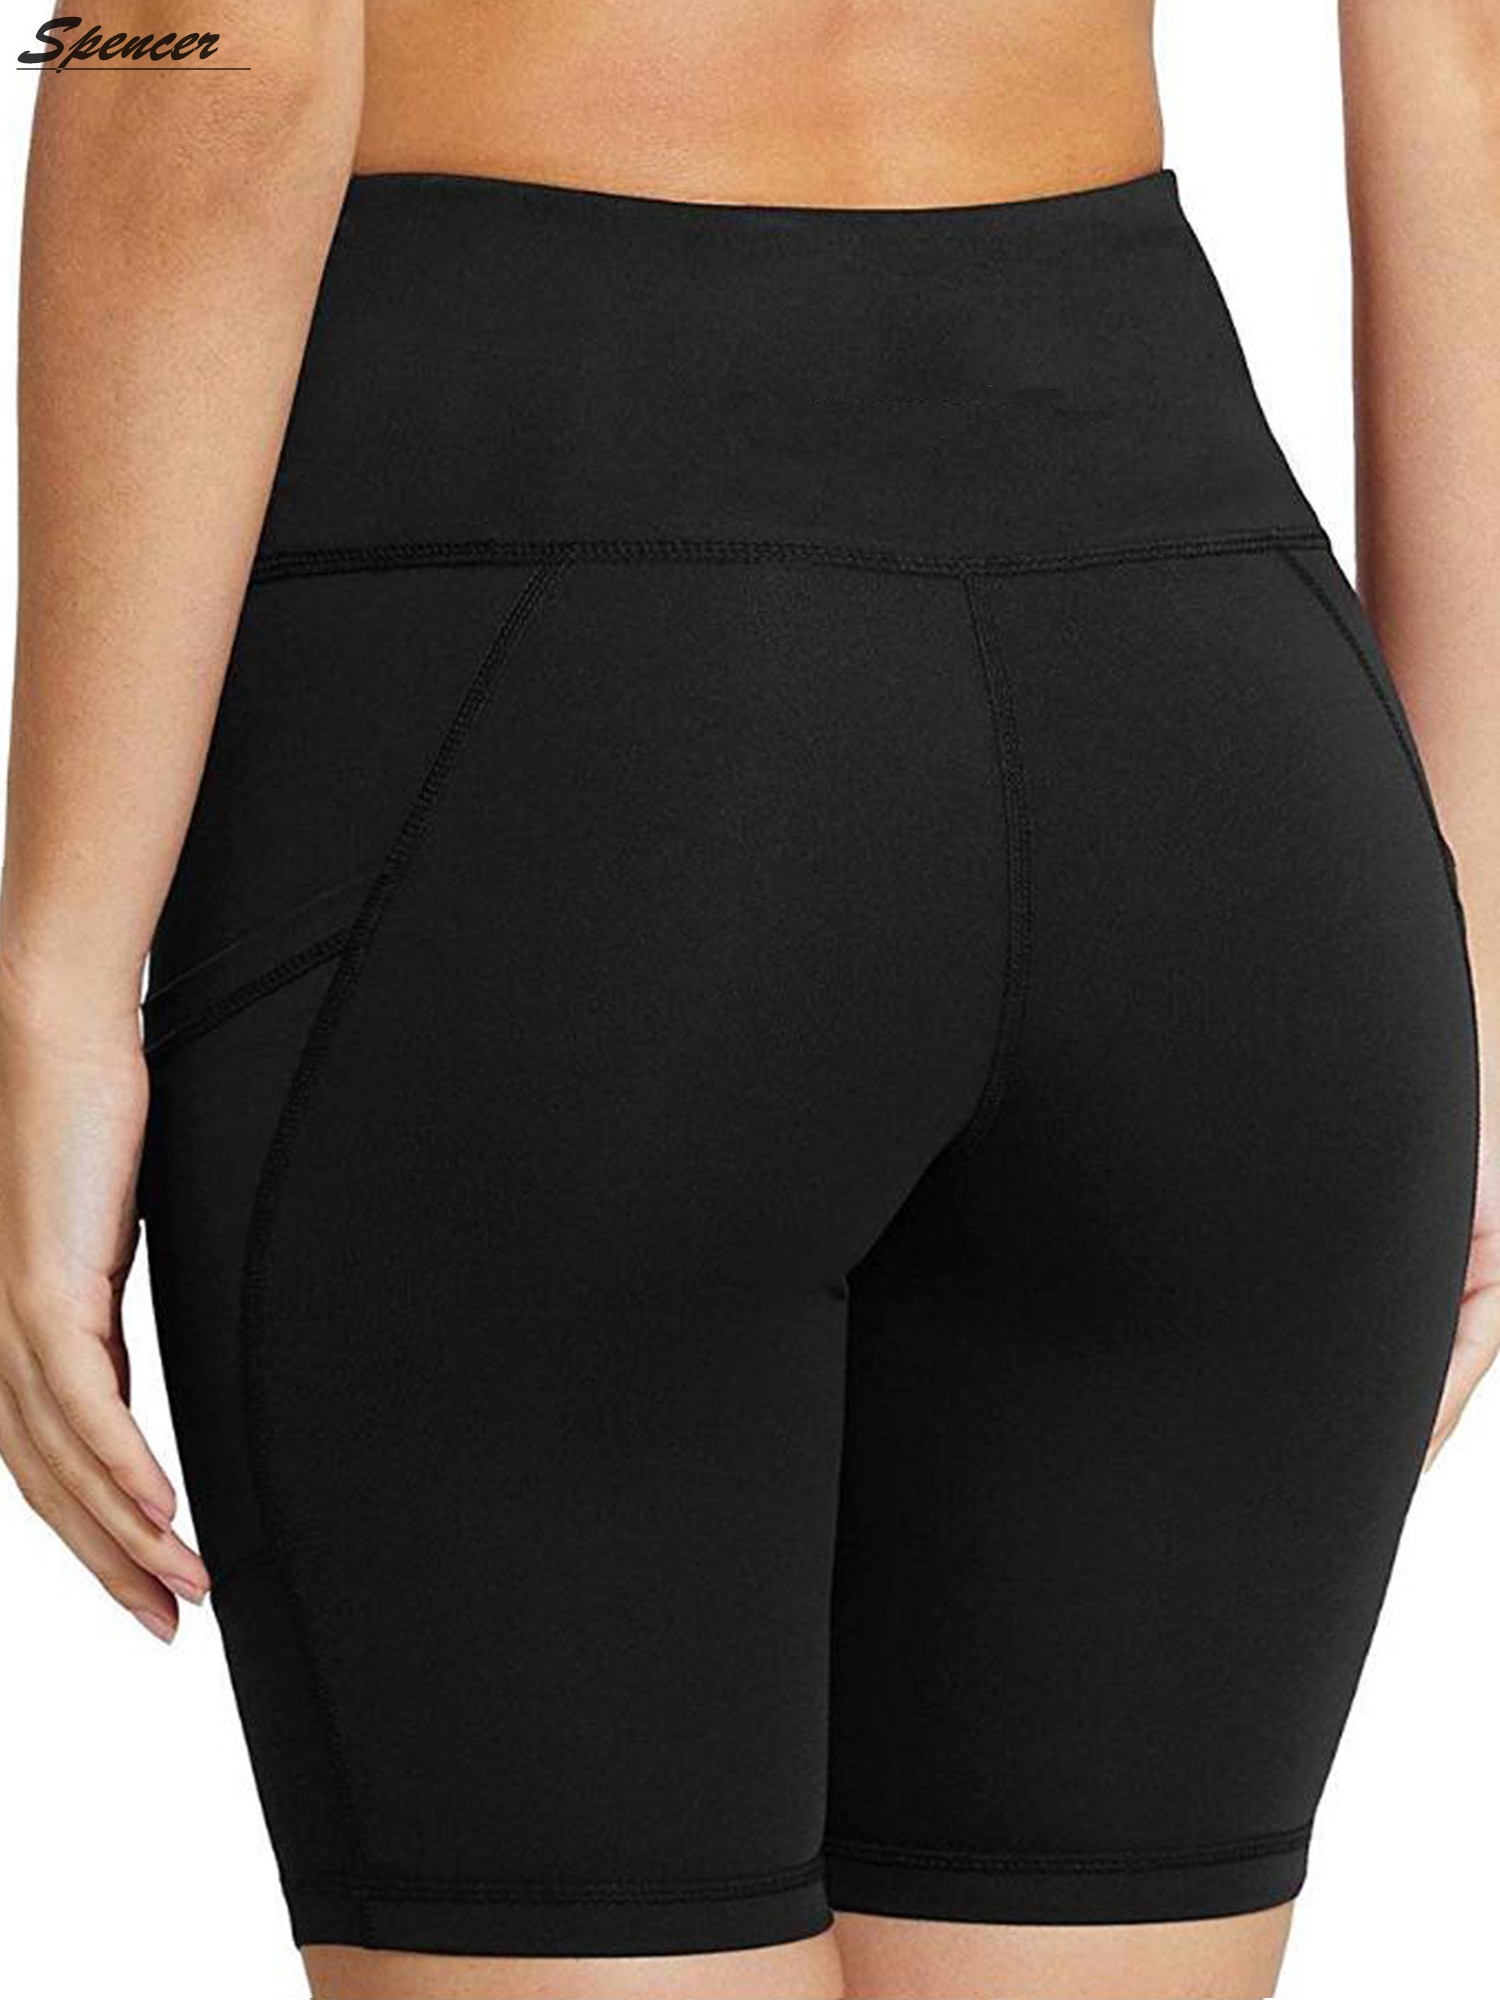 Spencer Womens High Waist Yoga Shorts with Side Pockets Tummy Control Workout 4 Way Stretch Yoga Leggings "M, Black" - image 5 of 9